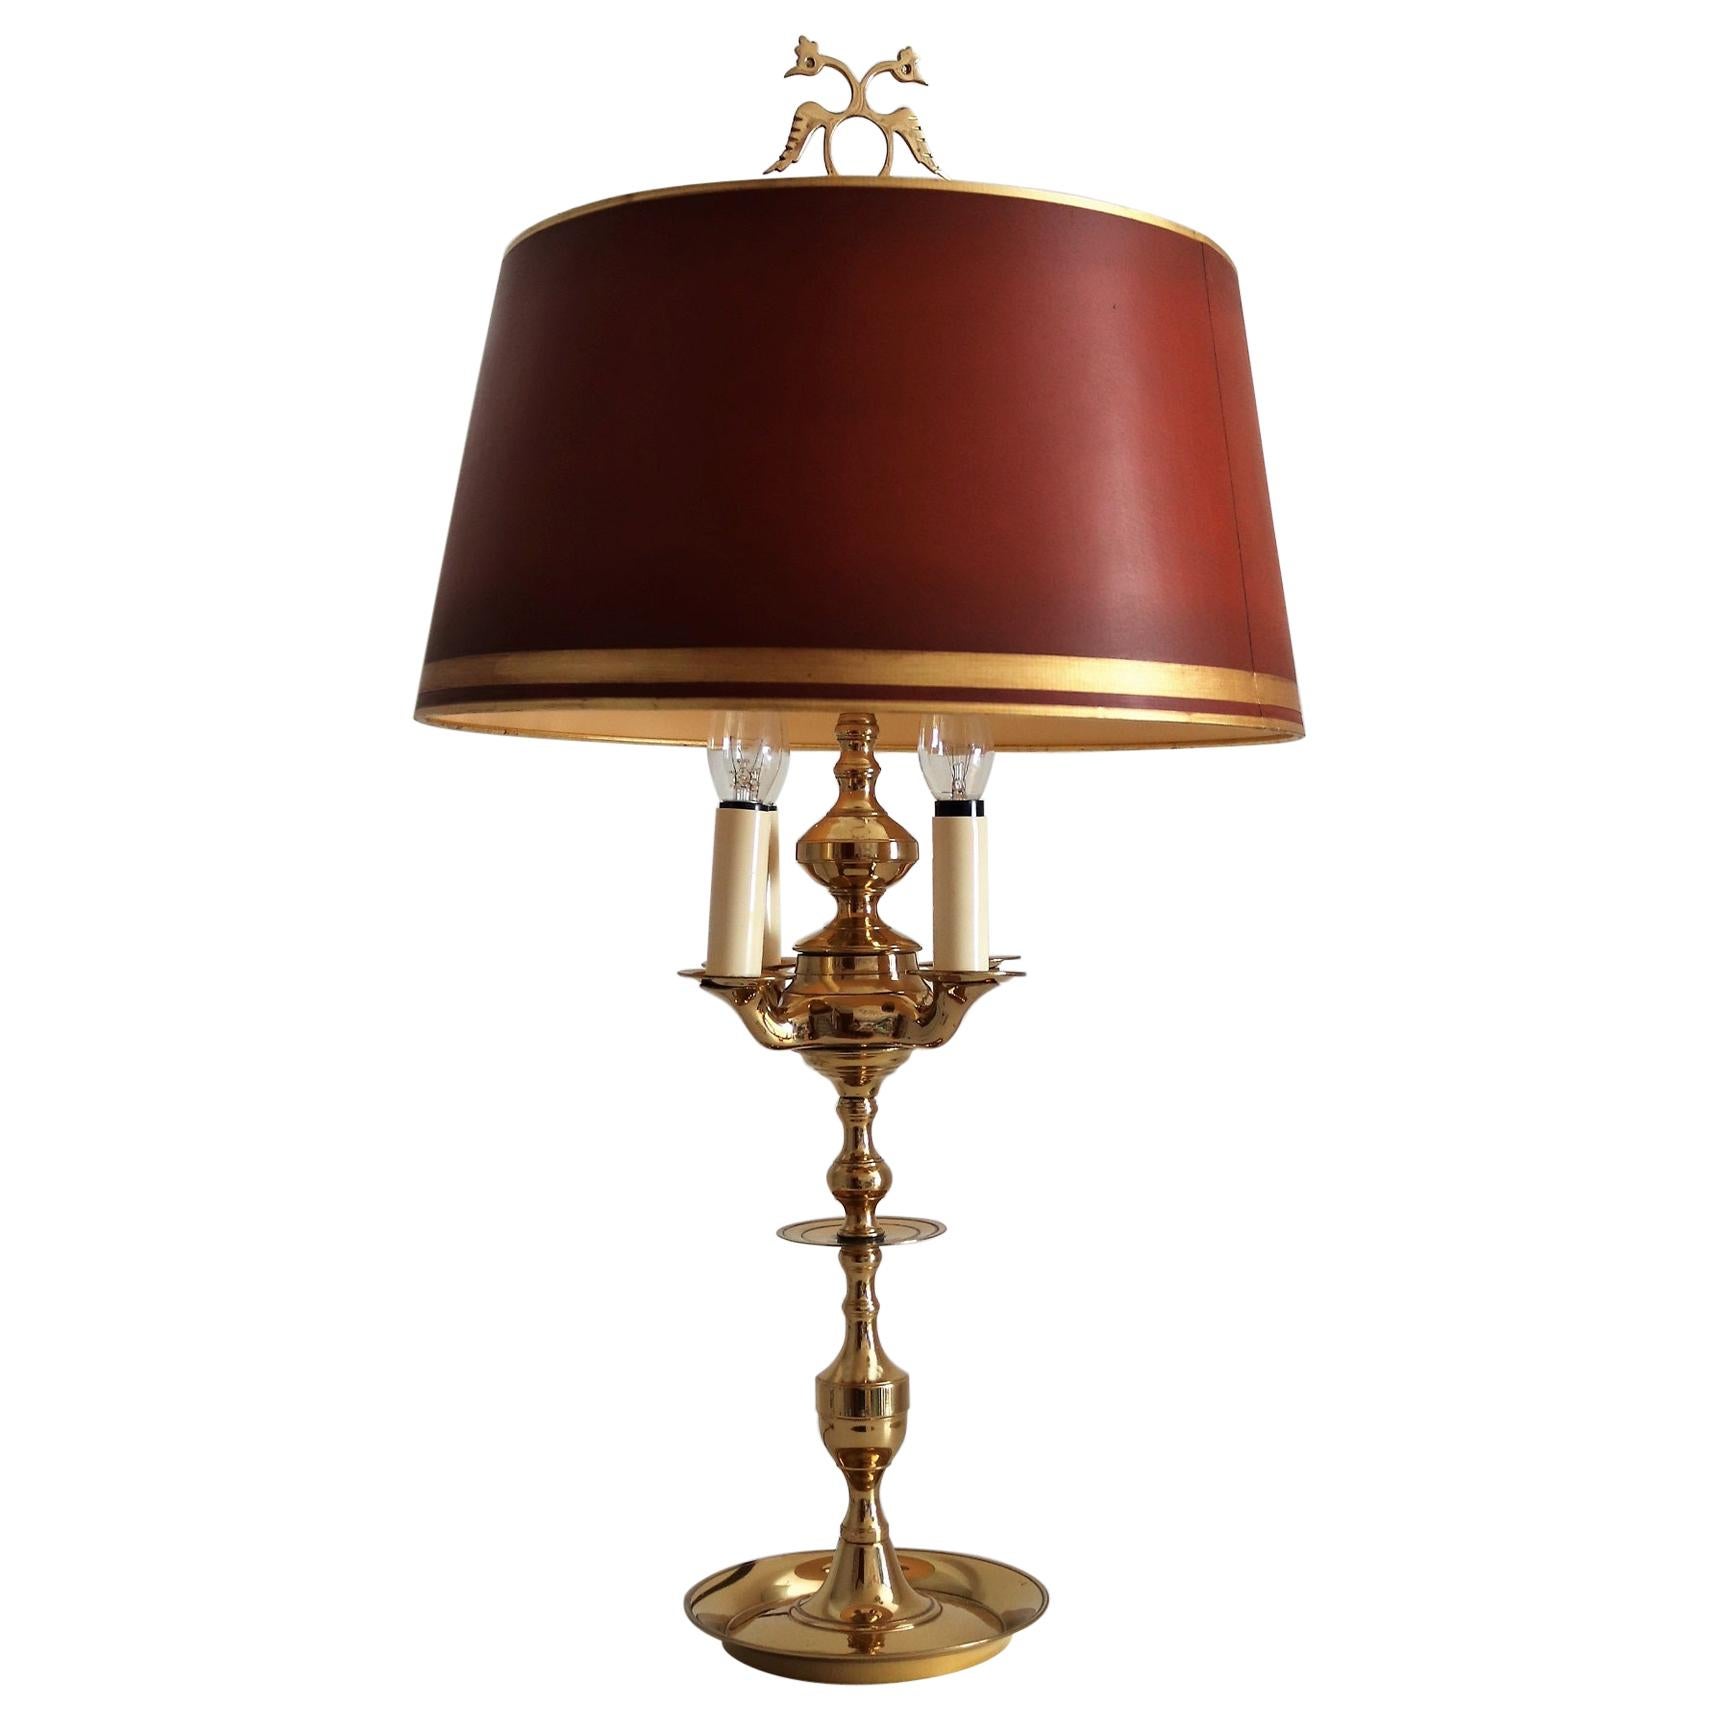 Midcentury Four-Arm Brass Bouillotte Table Lamp in Louis XVI Style, 1950s